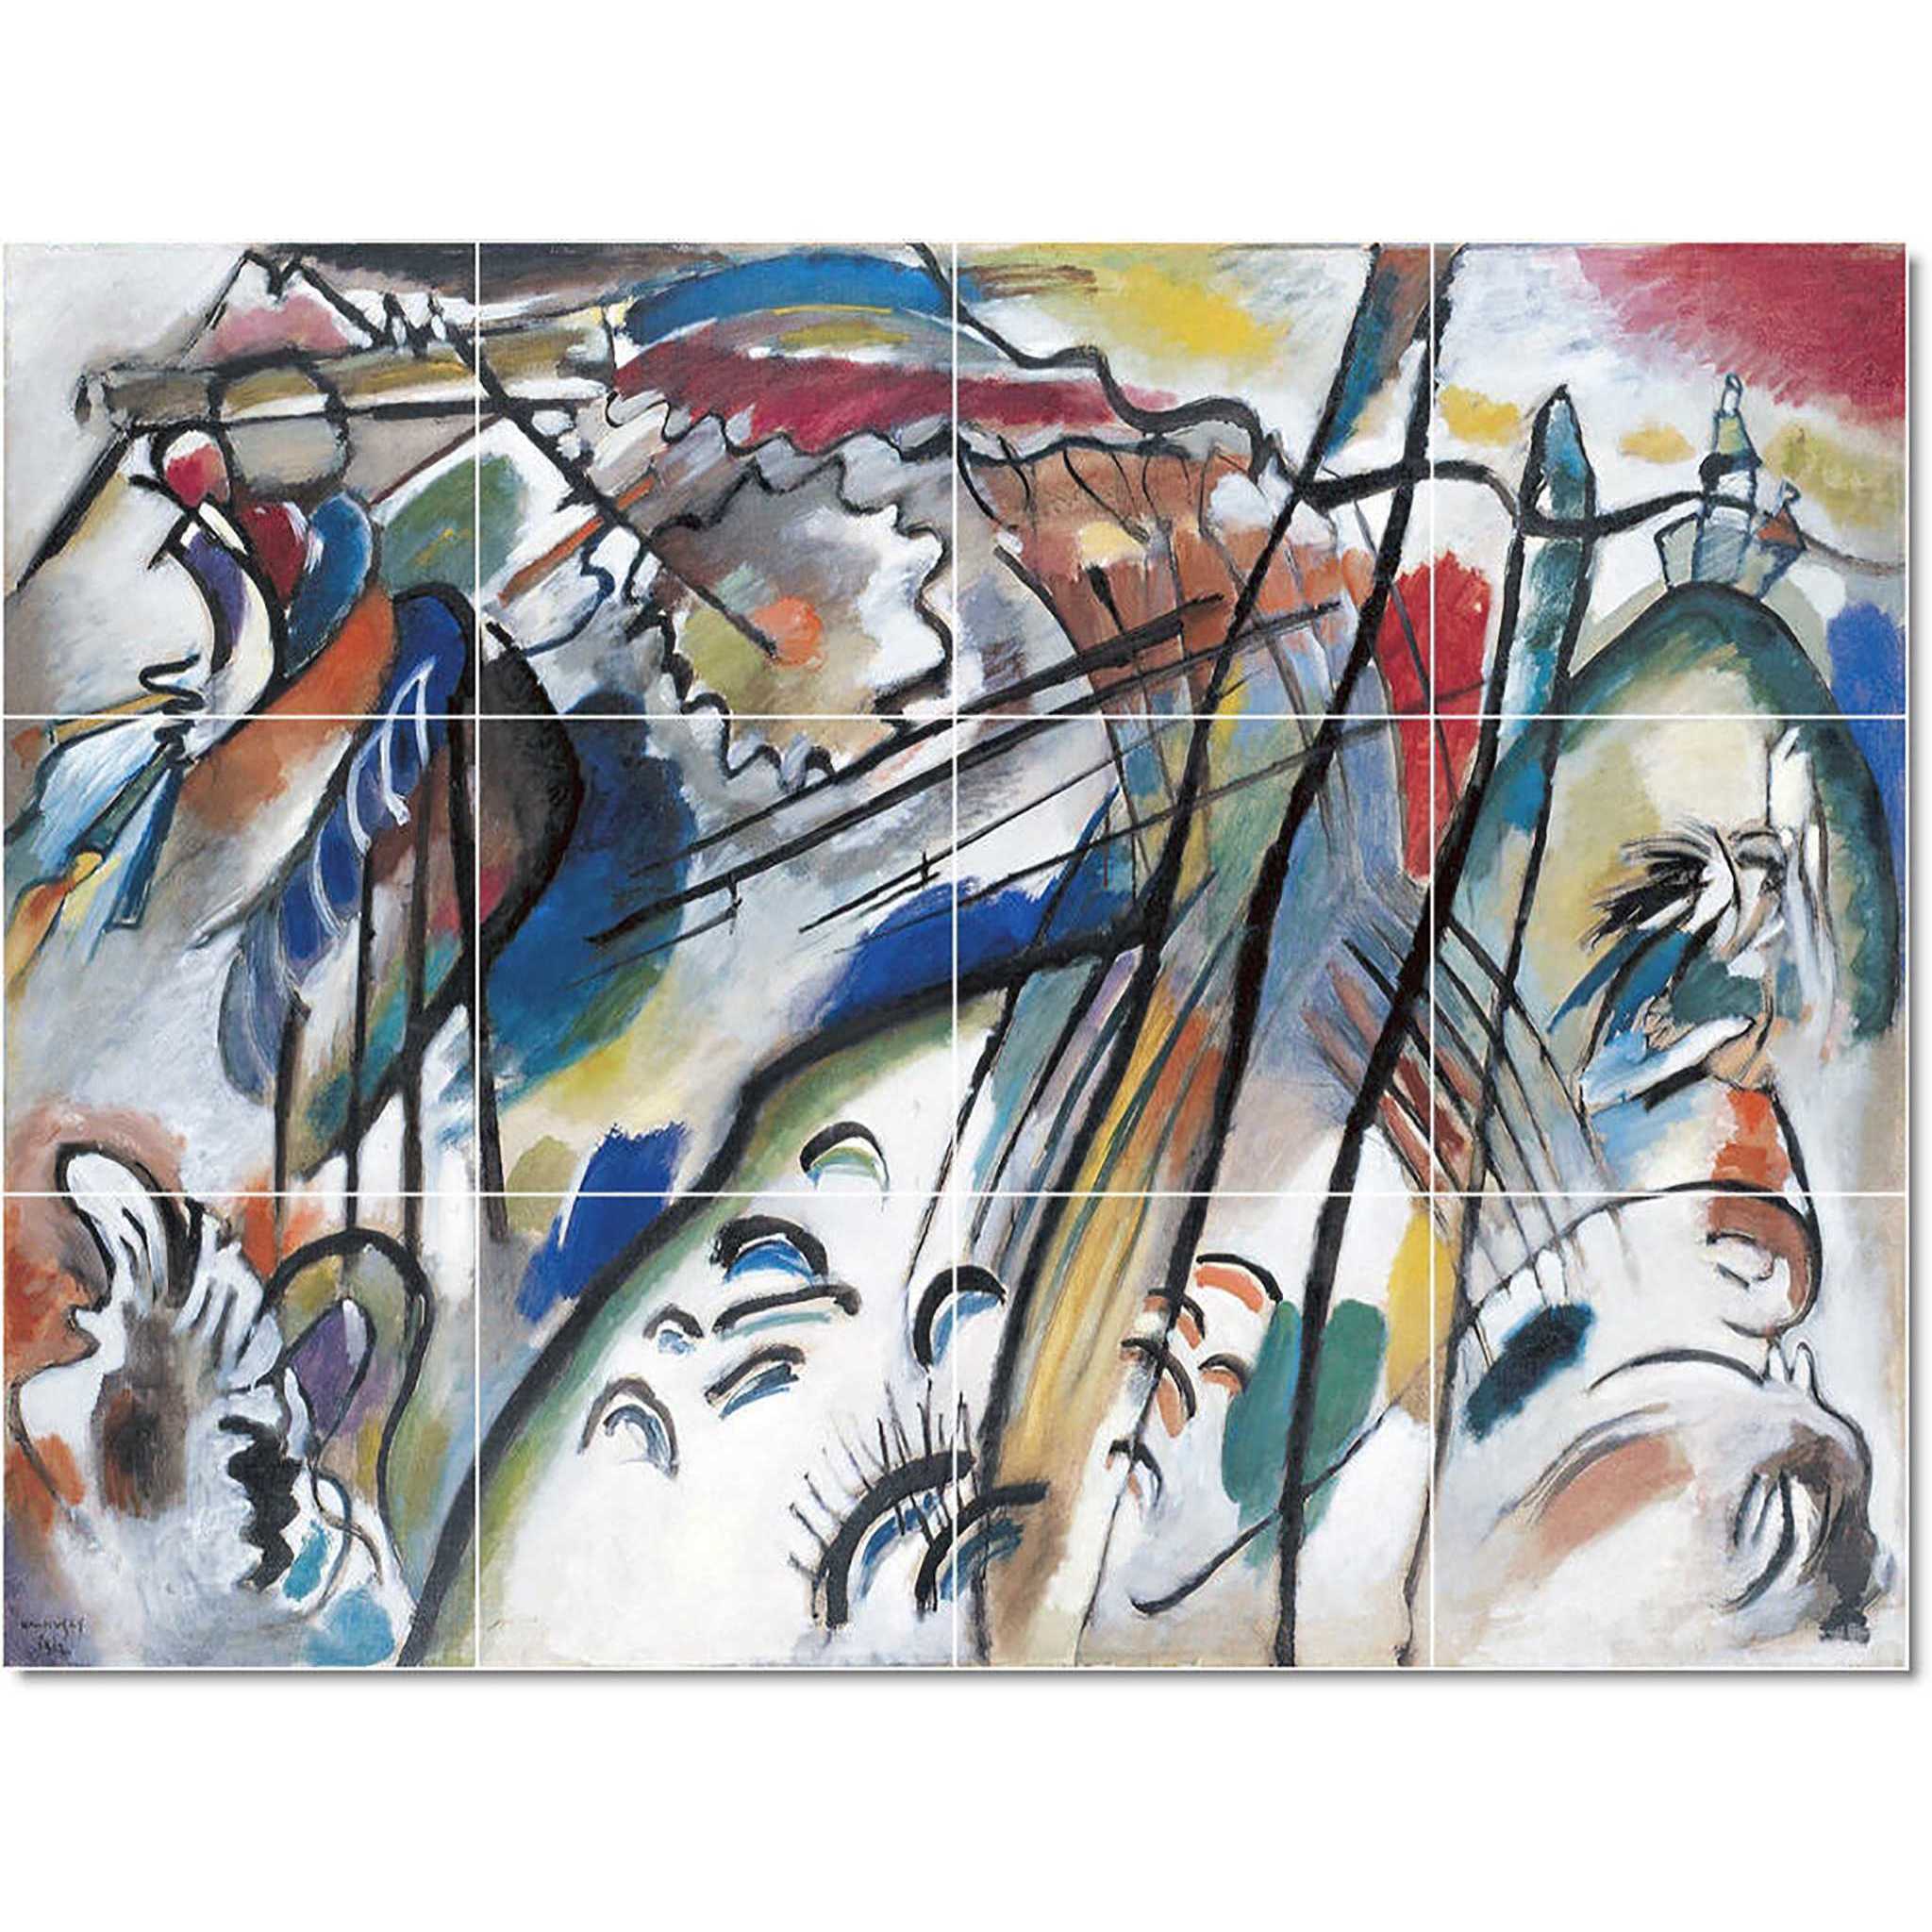 wassily kandinsky abstract painting ceramic tile mural p22718